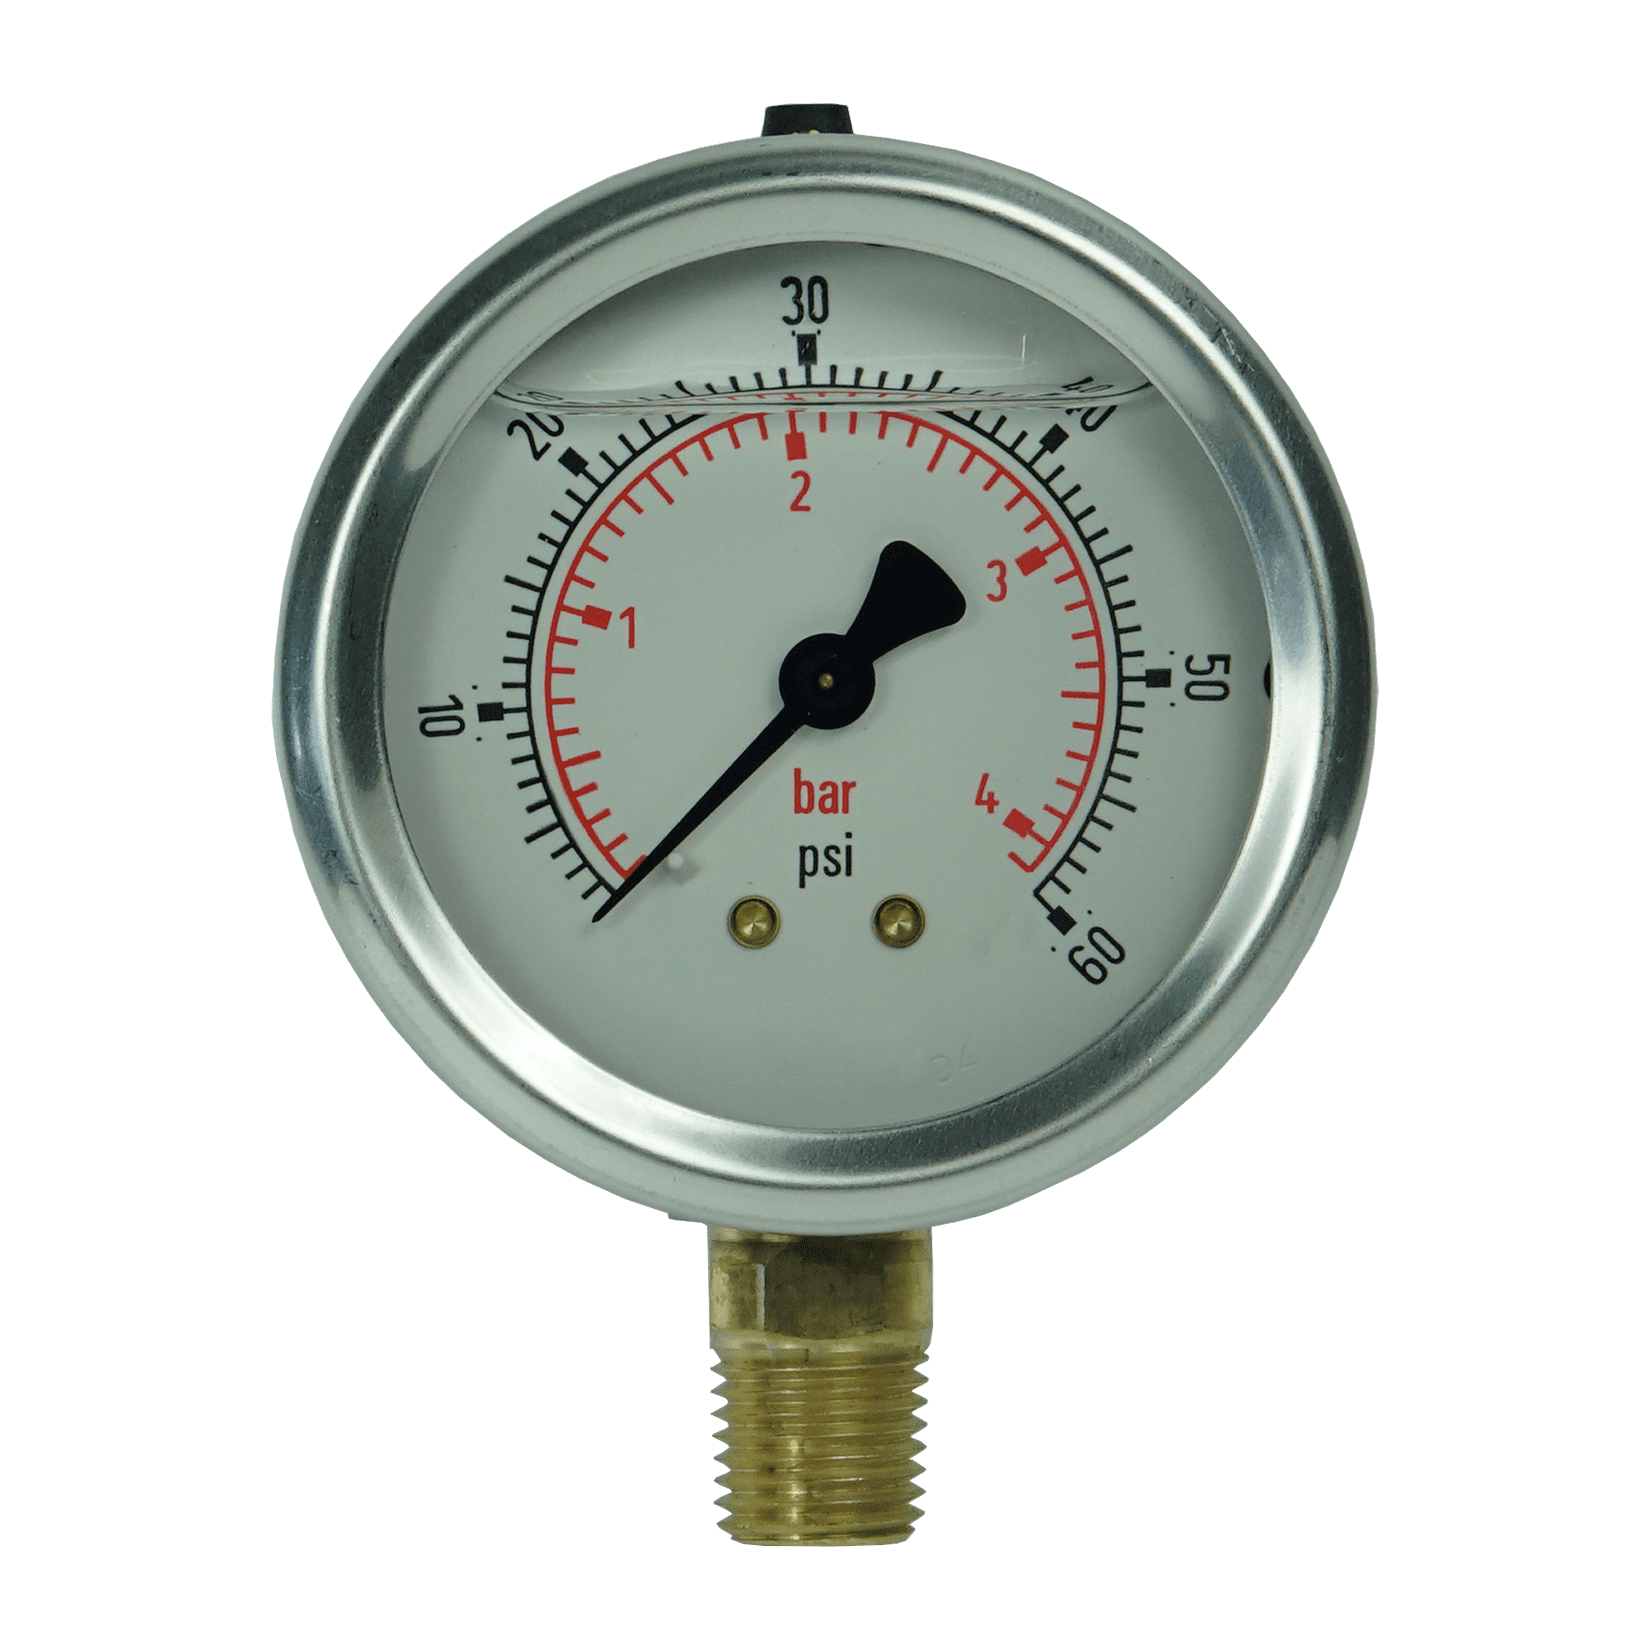 Details about   TOOLING CONNECTION 0-60PSI GAUGE 419-594-3339 